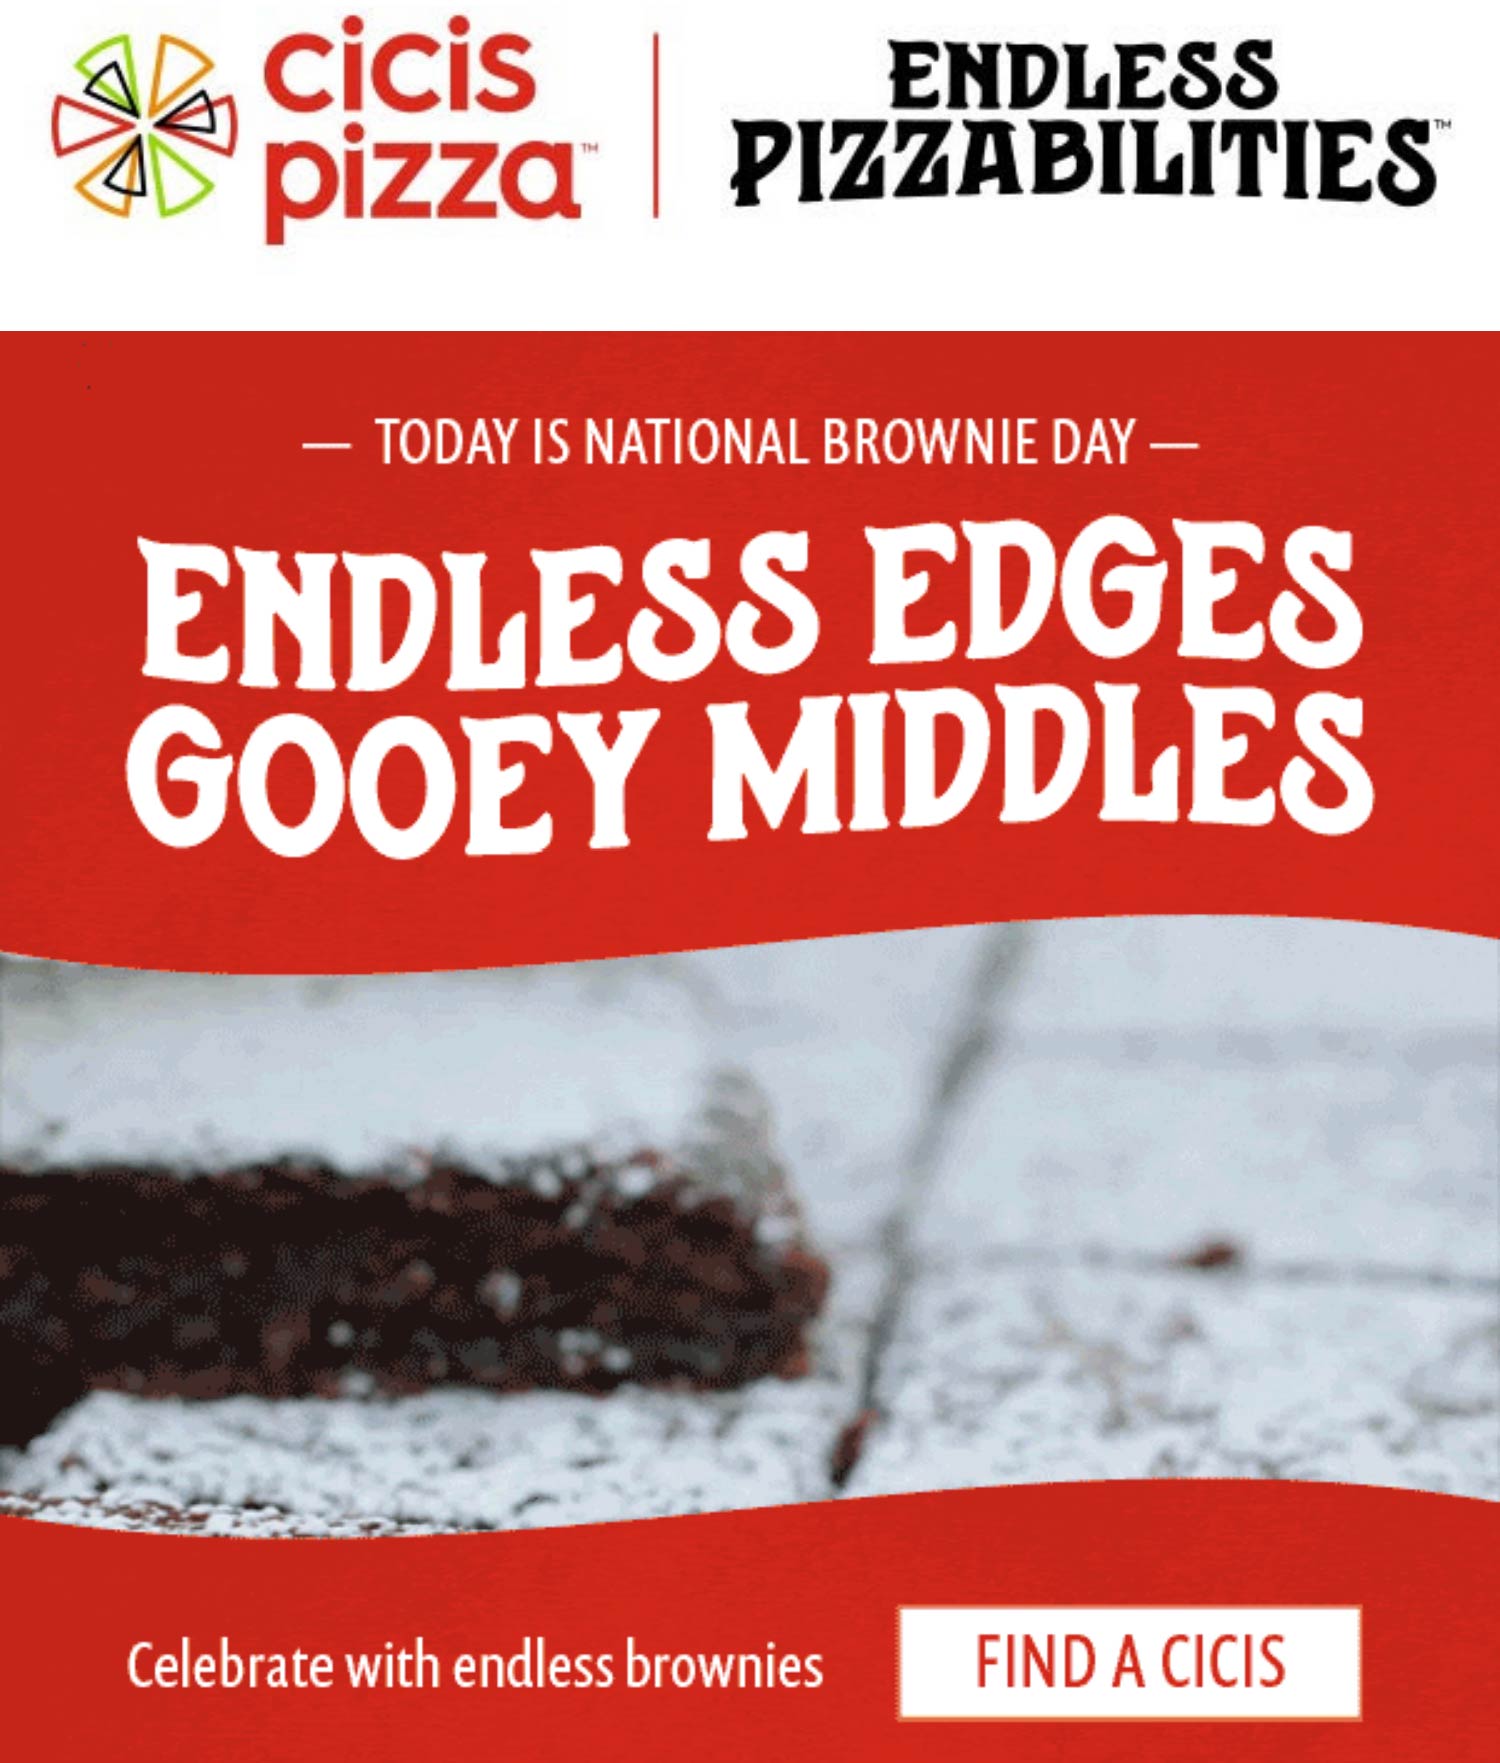 Cicis Pizza restaurants Coupon  Endless brownies today at Cicis Pizza #cicispizza 